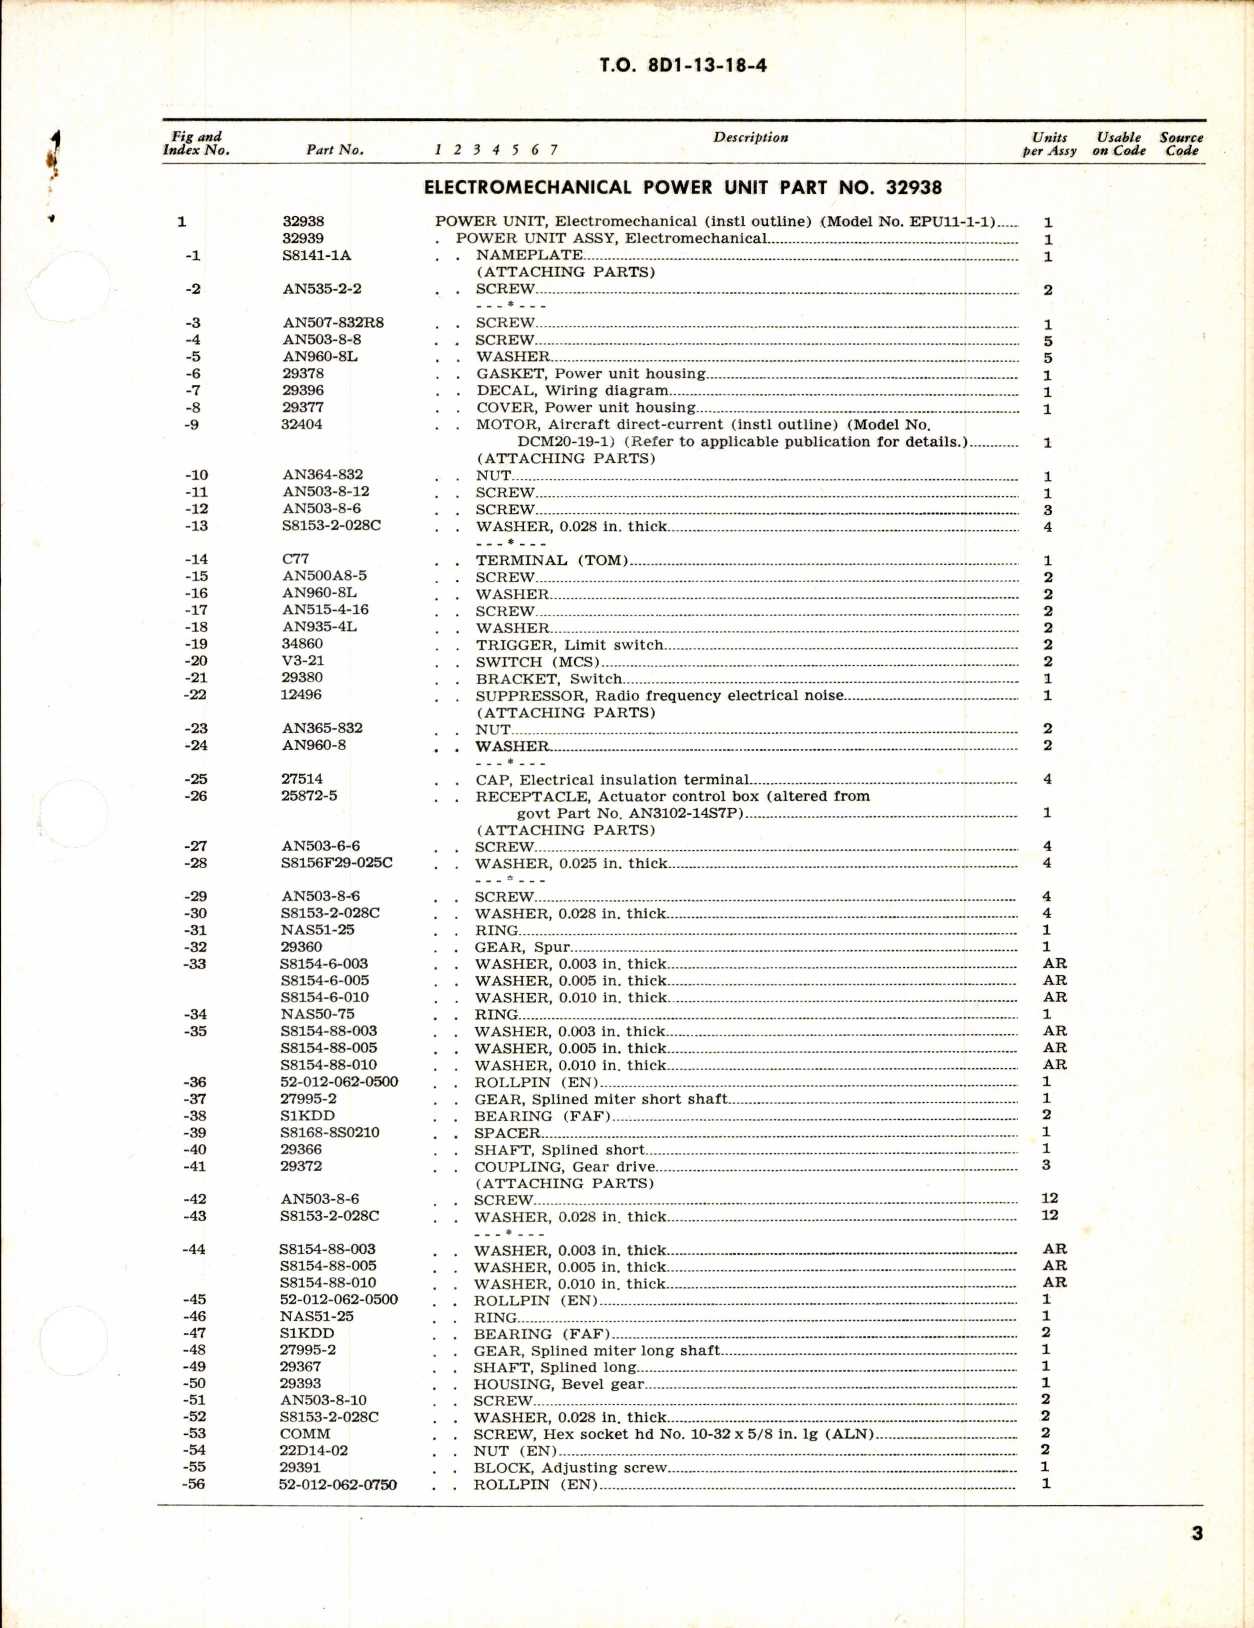 Sample page 3 from AirCorps Library document: Illustrated Parts Breakdown Electromechanical Power Unit